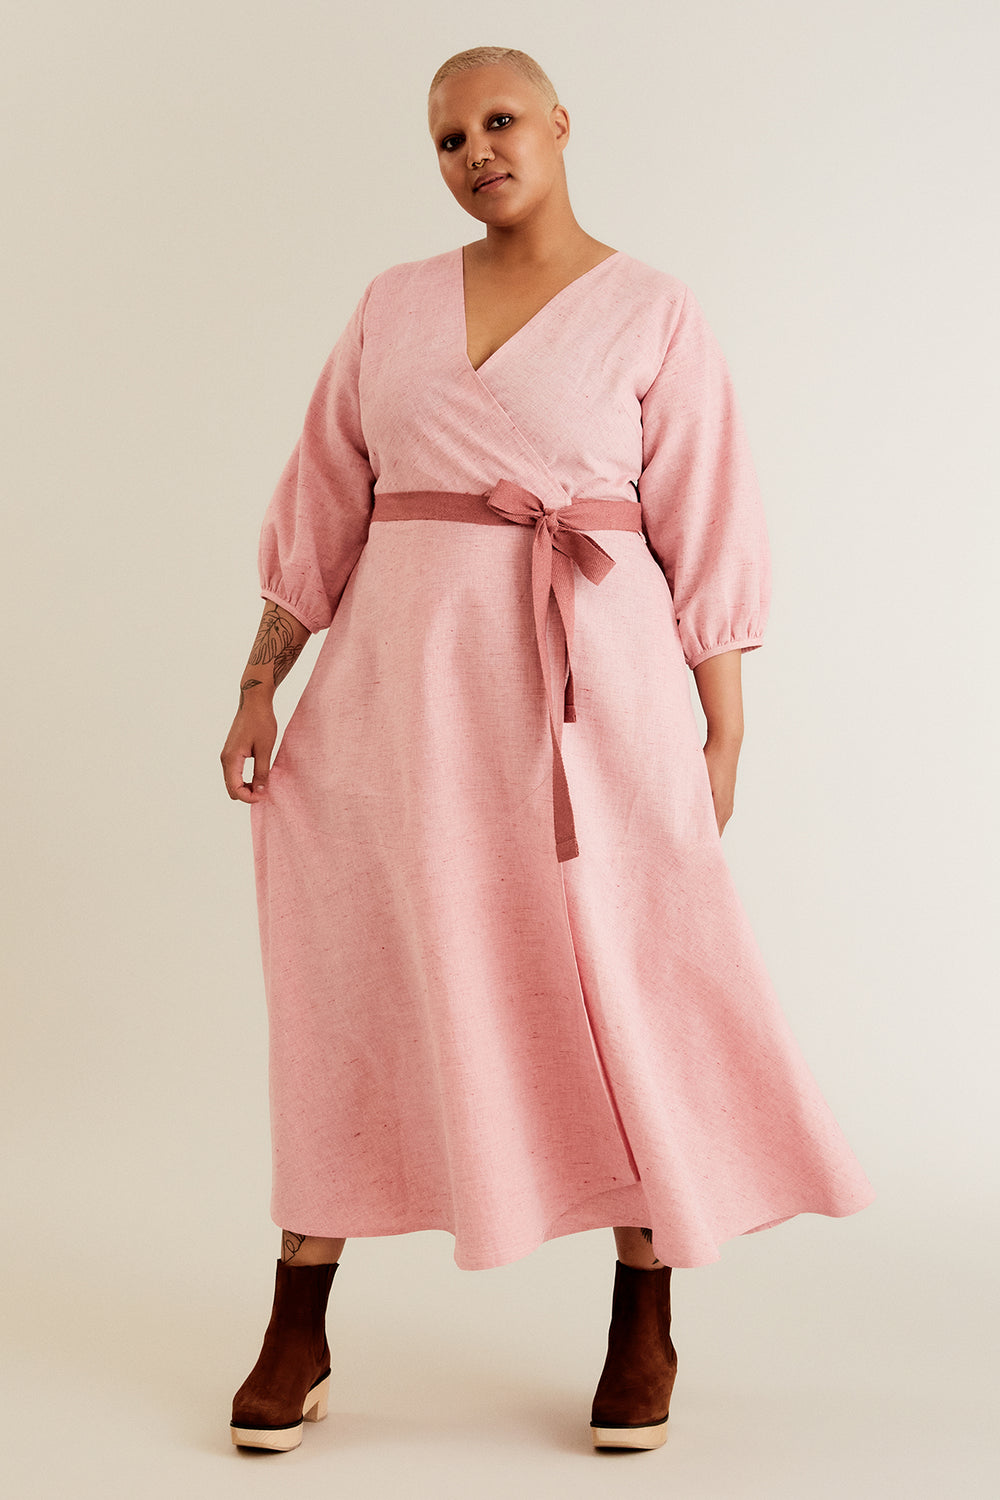 Women wearing the Hali Wrap Dress sewing pattern Named on The Fold Line. A dress pattern made in cotton, linen, Tencel and rayon shirtings or dress-weight fabrics, featuring a semi-fitted wrap bodice, front V-neck, back yoke, wrap tie closure, side pocket